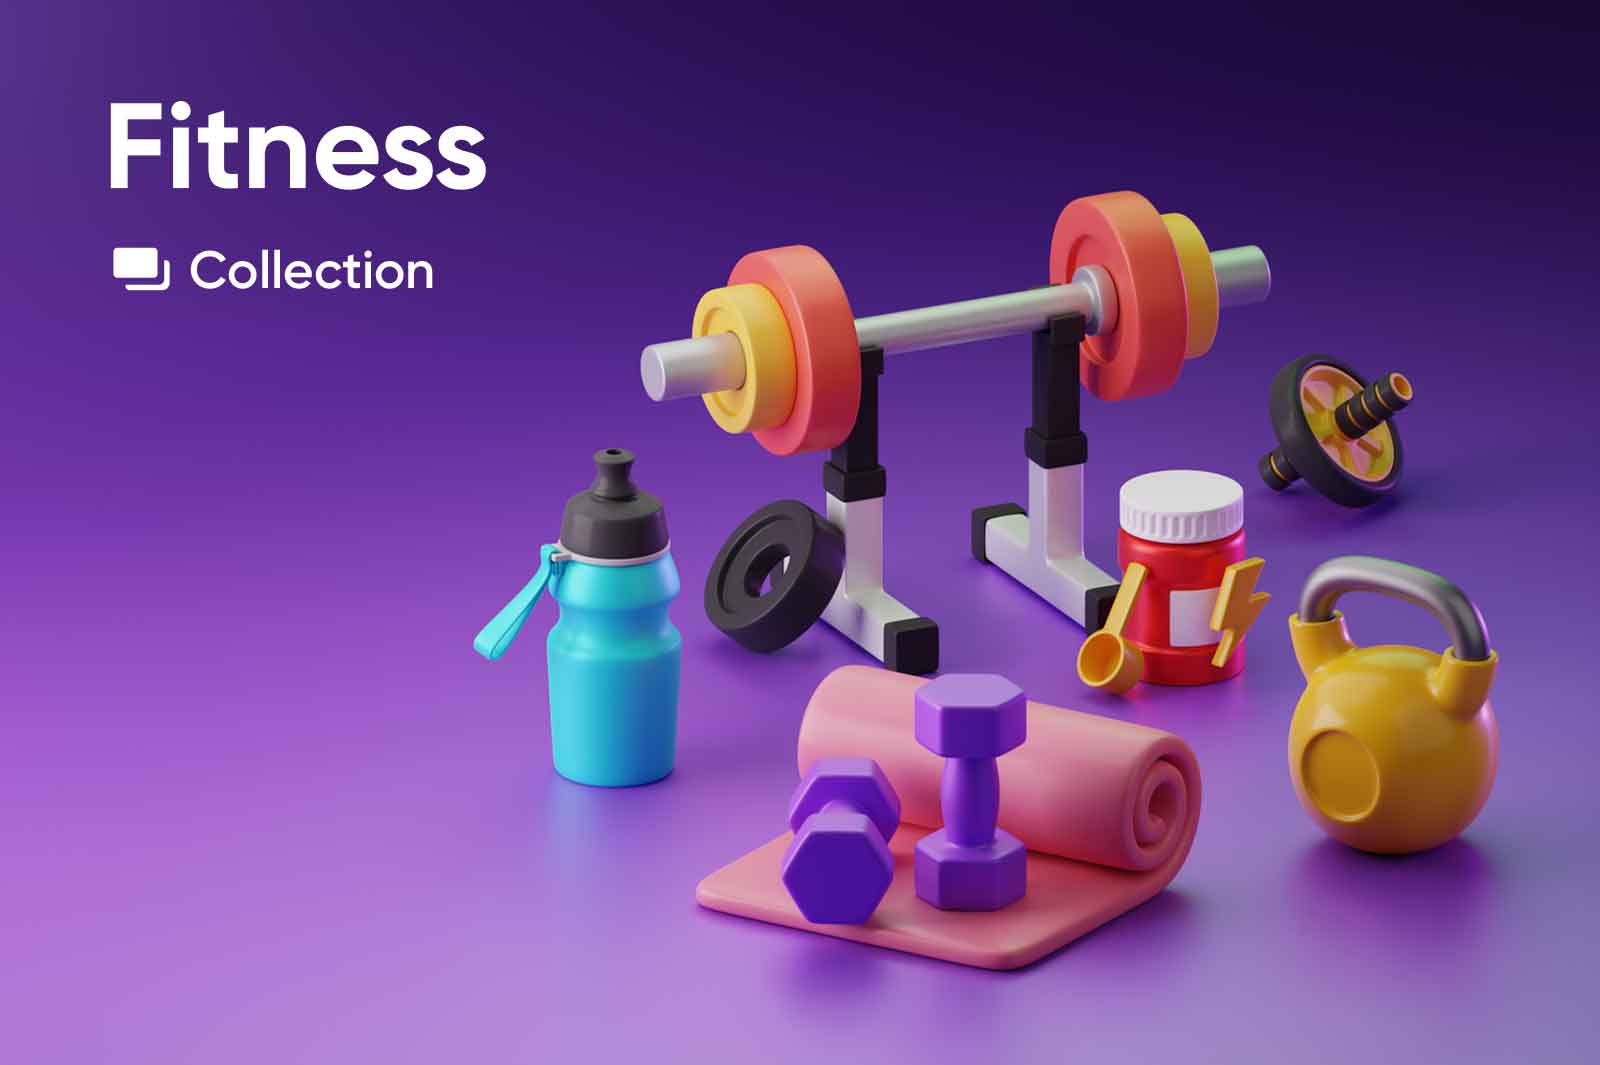 Fitness 3D icons illustrations. Spoerts related exercise and equipment. Blender 3D source files, transparent PNG, JPG.